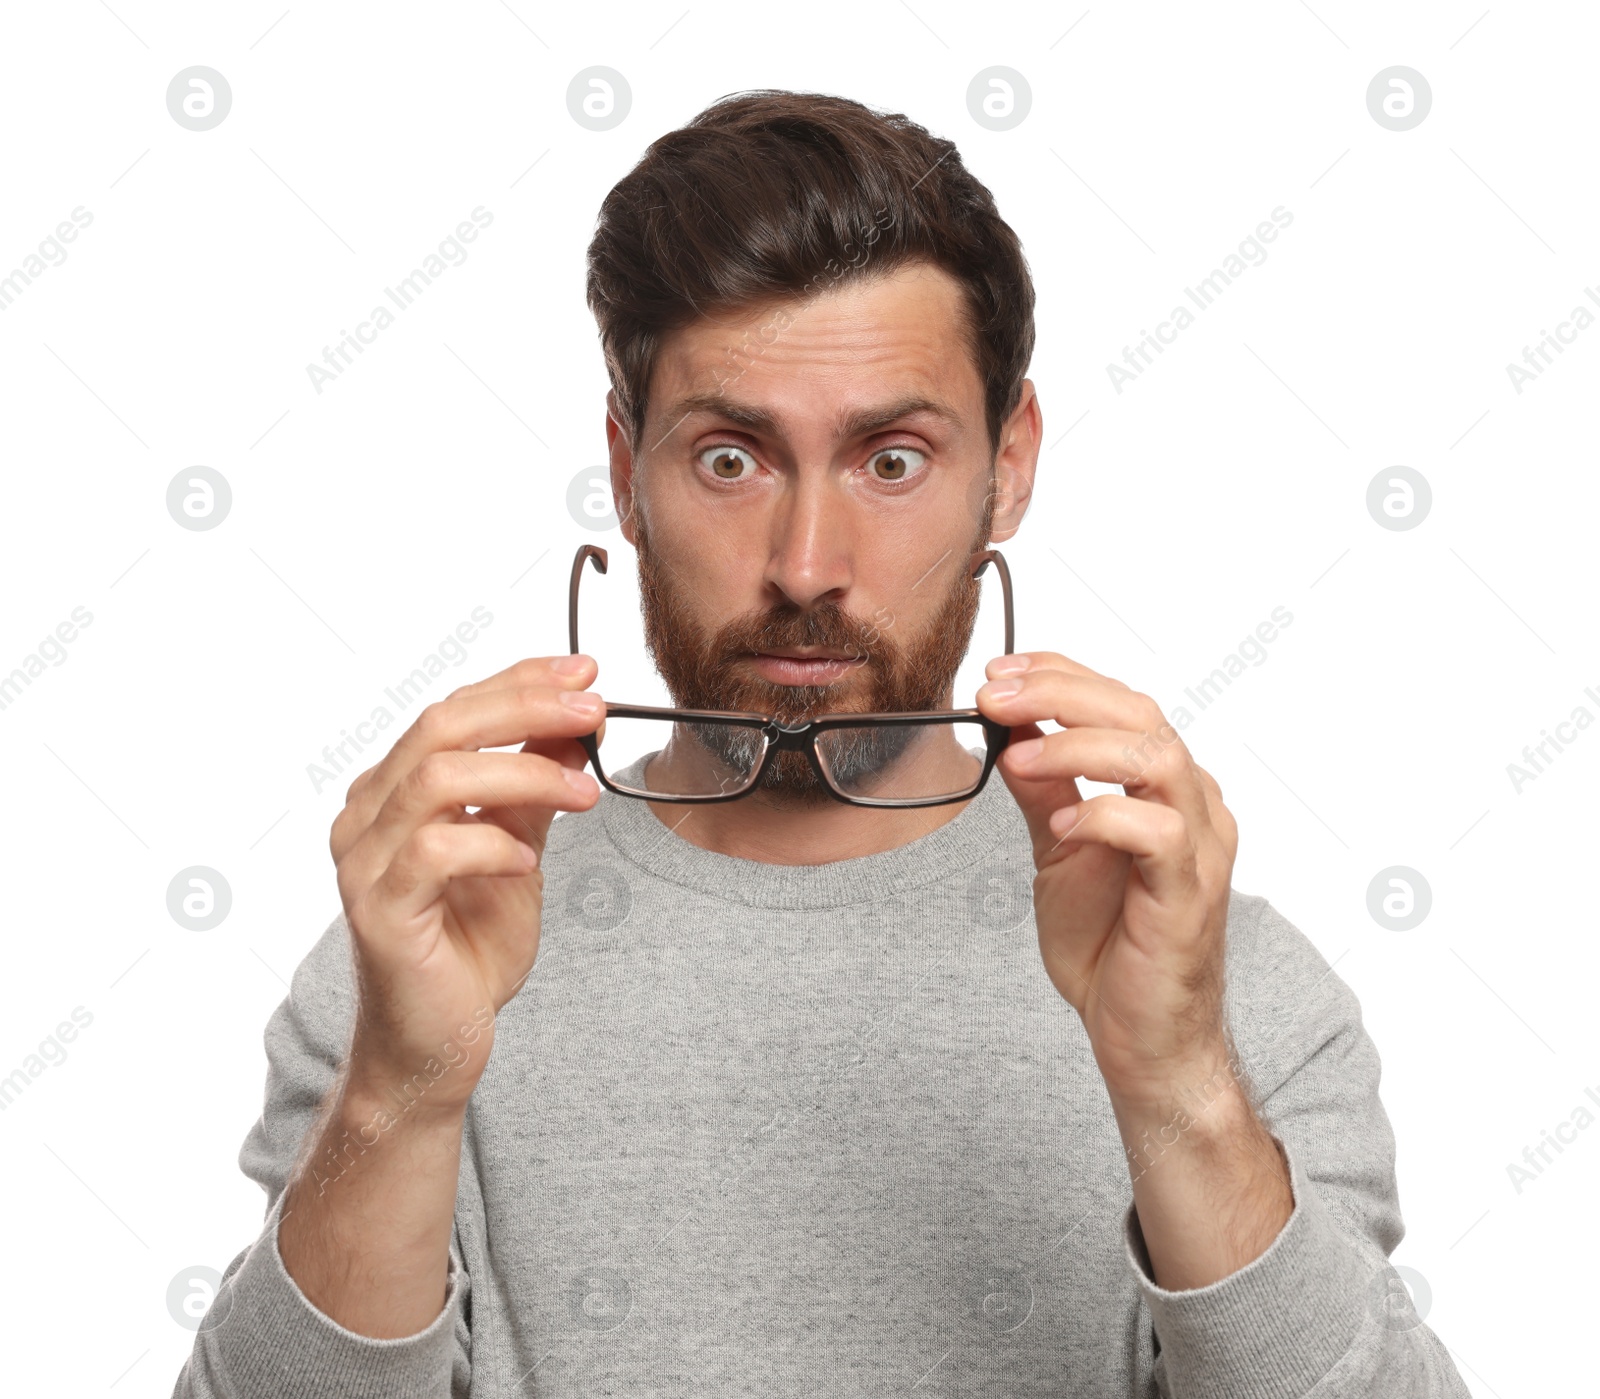 Photo of Man suffering from eyestrain on white background